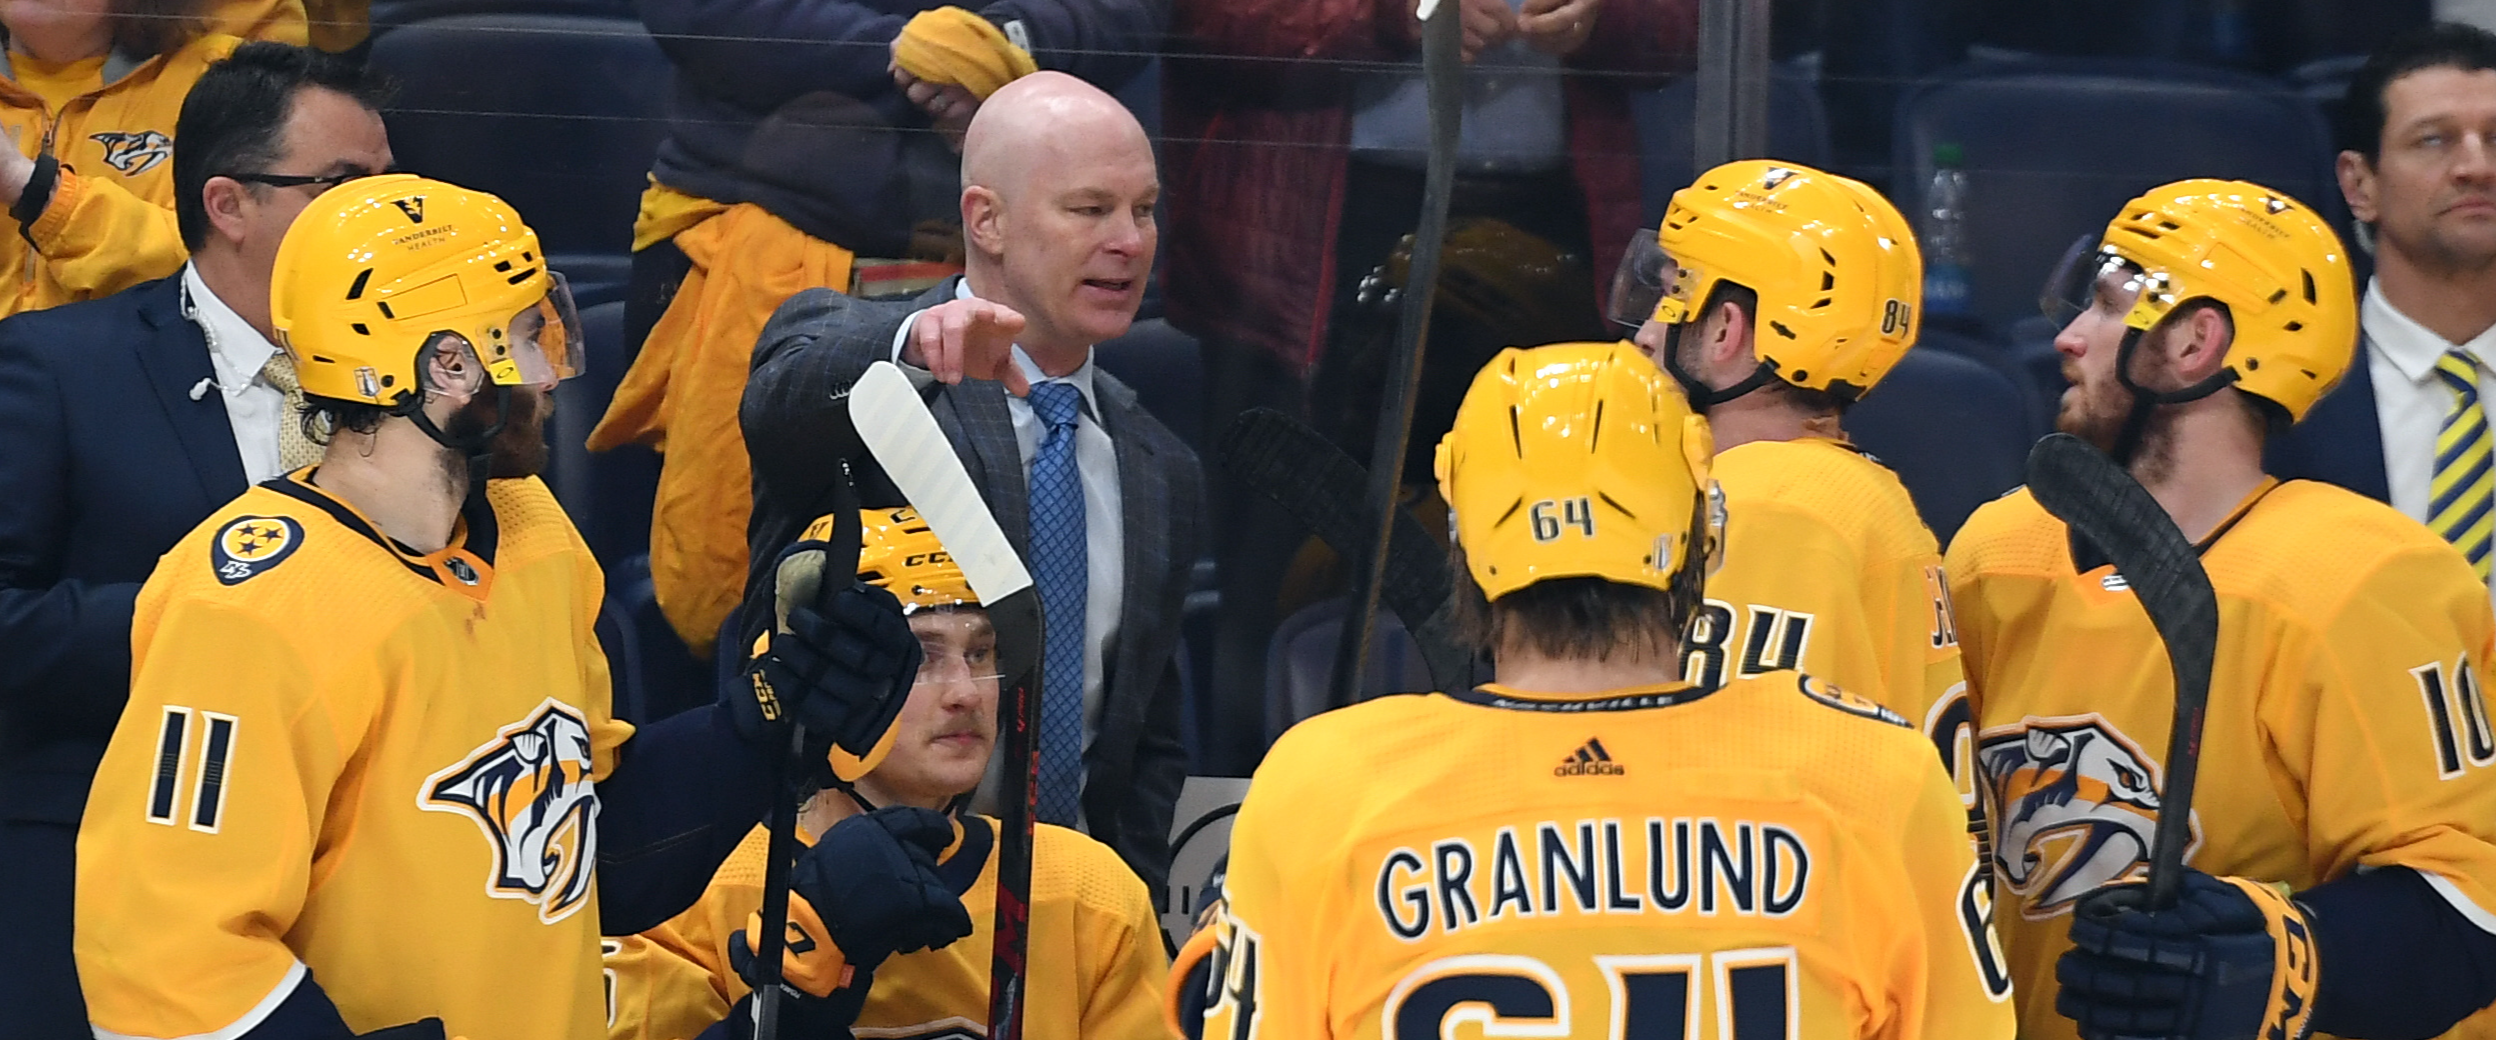 The first-round loss to the Avs showed just how far the Preds are from a Cup